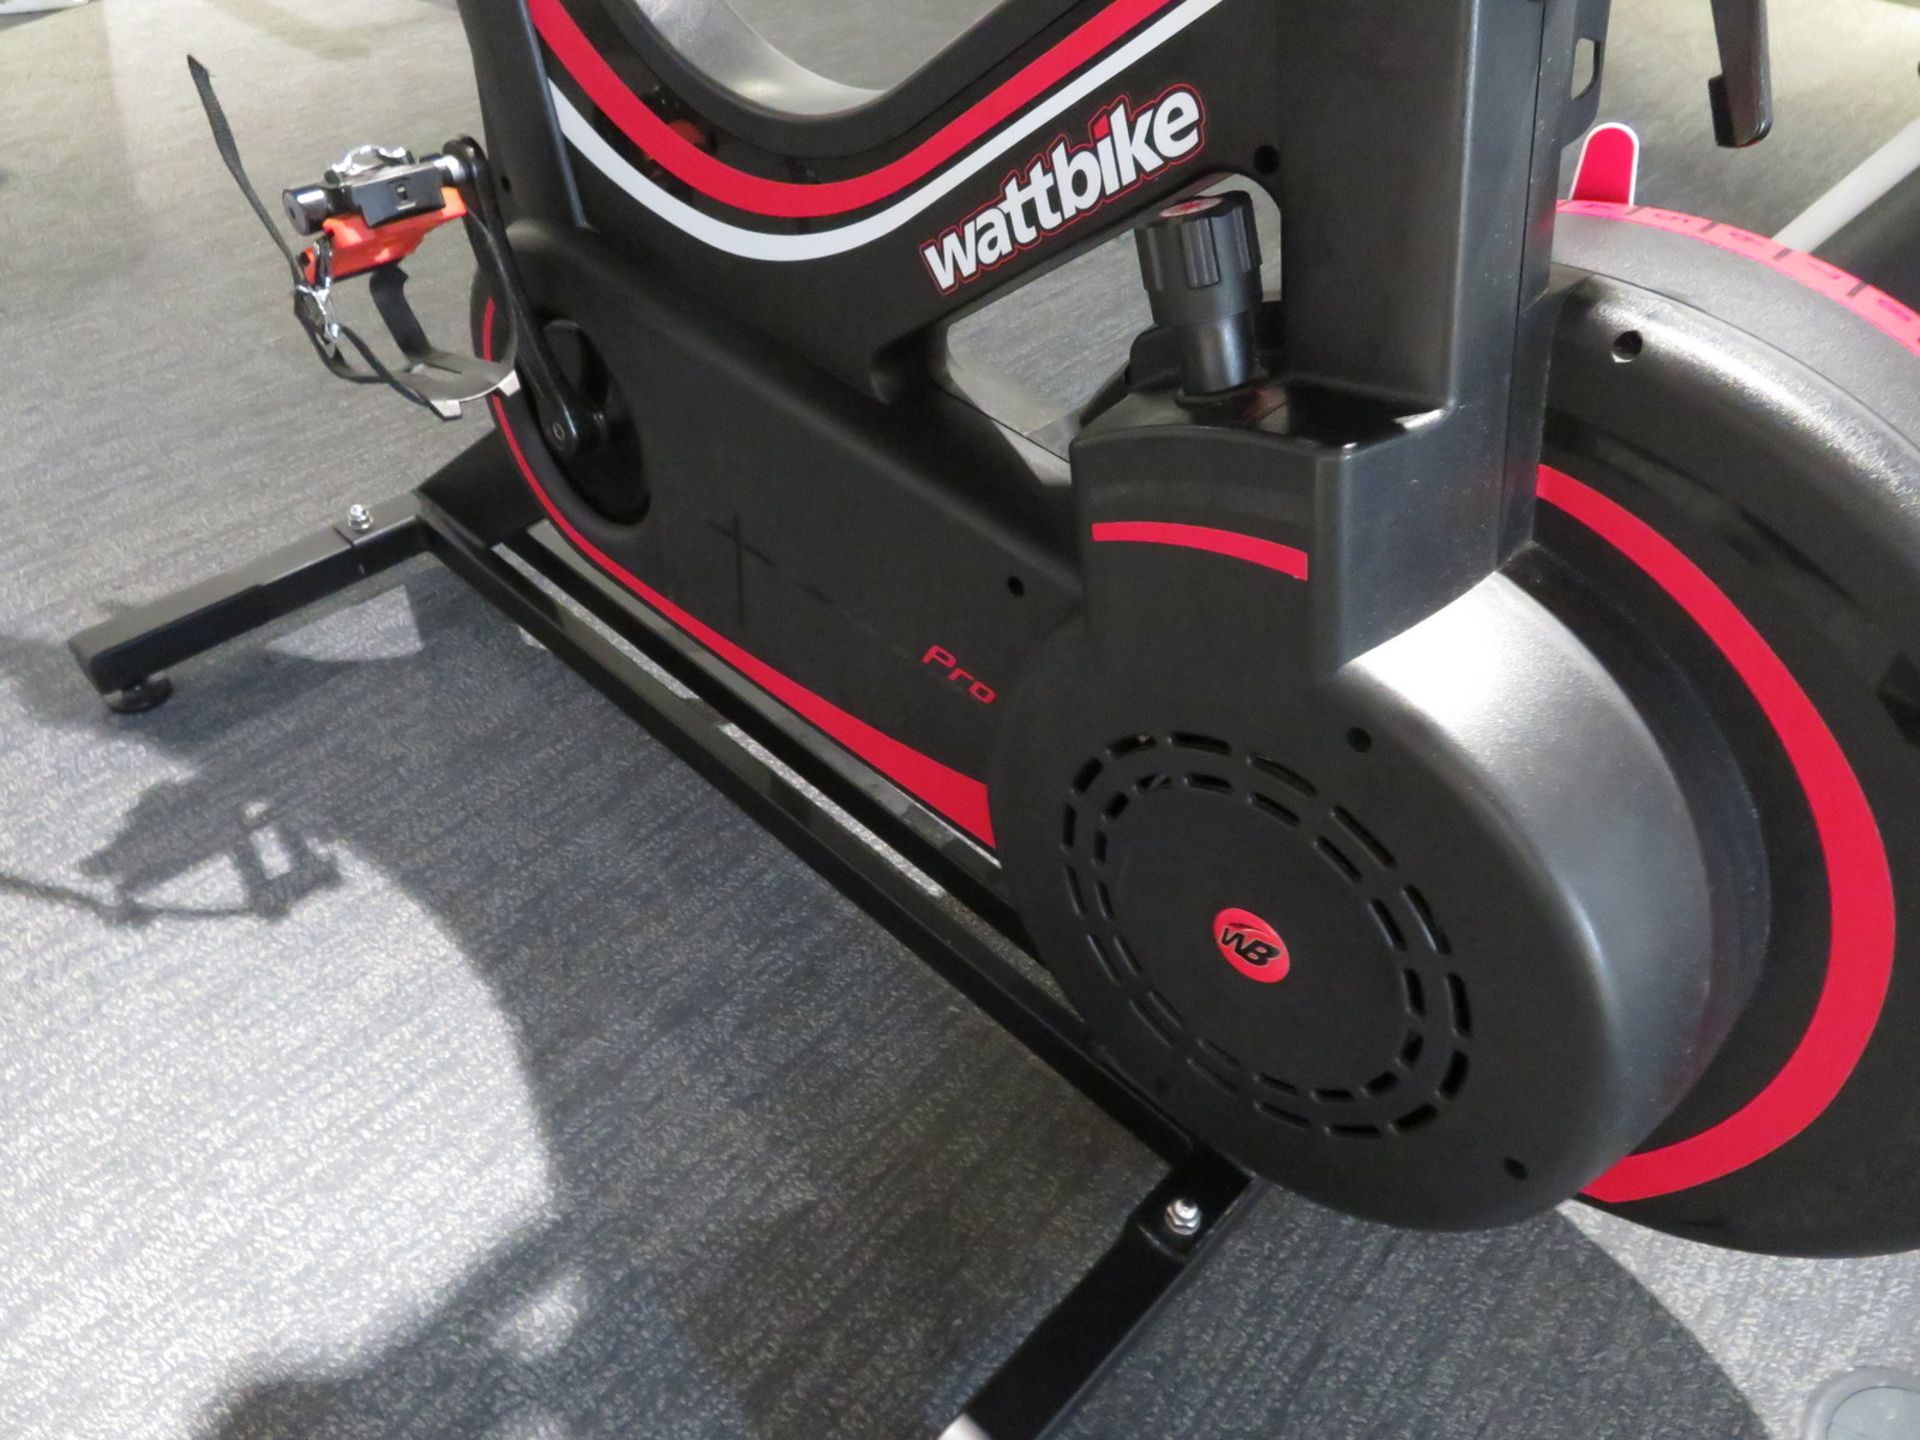 Watt Bike Pro Exercise Bike Complete With Model B Digital Display Console. Good Working Condition. - Image 3 of 8